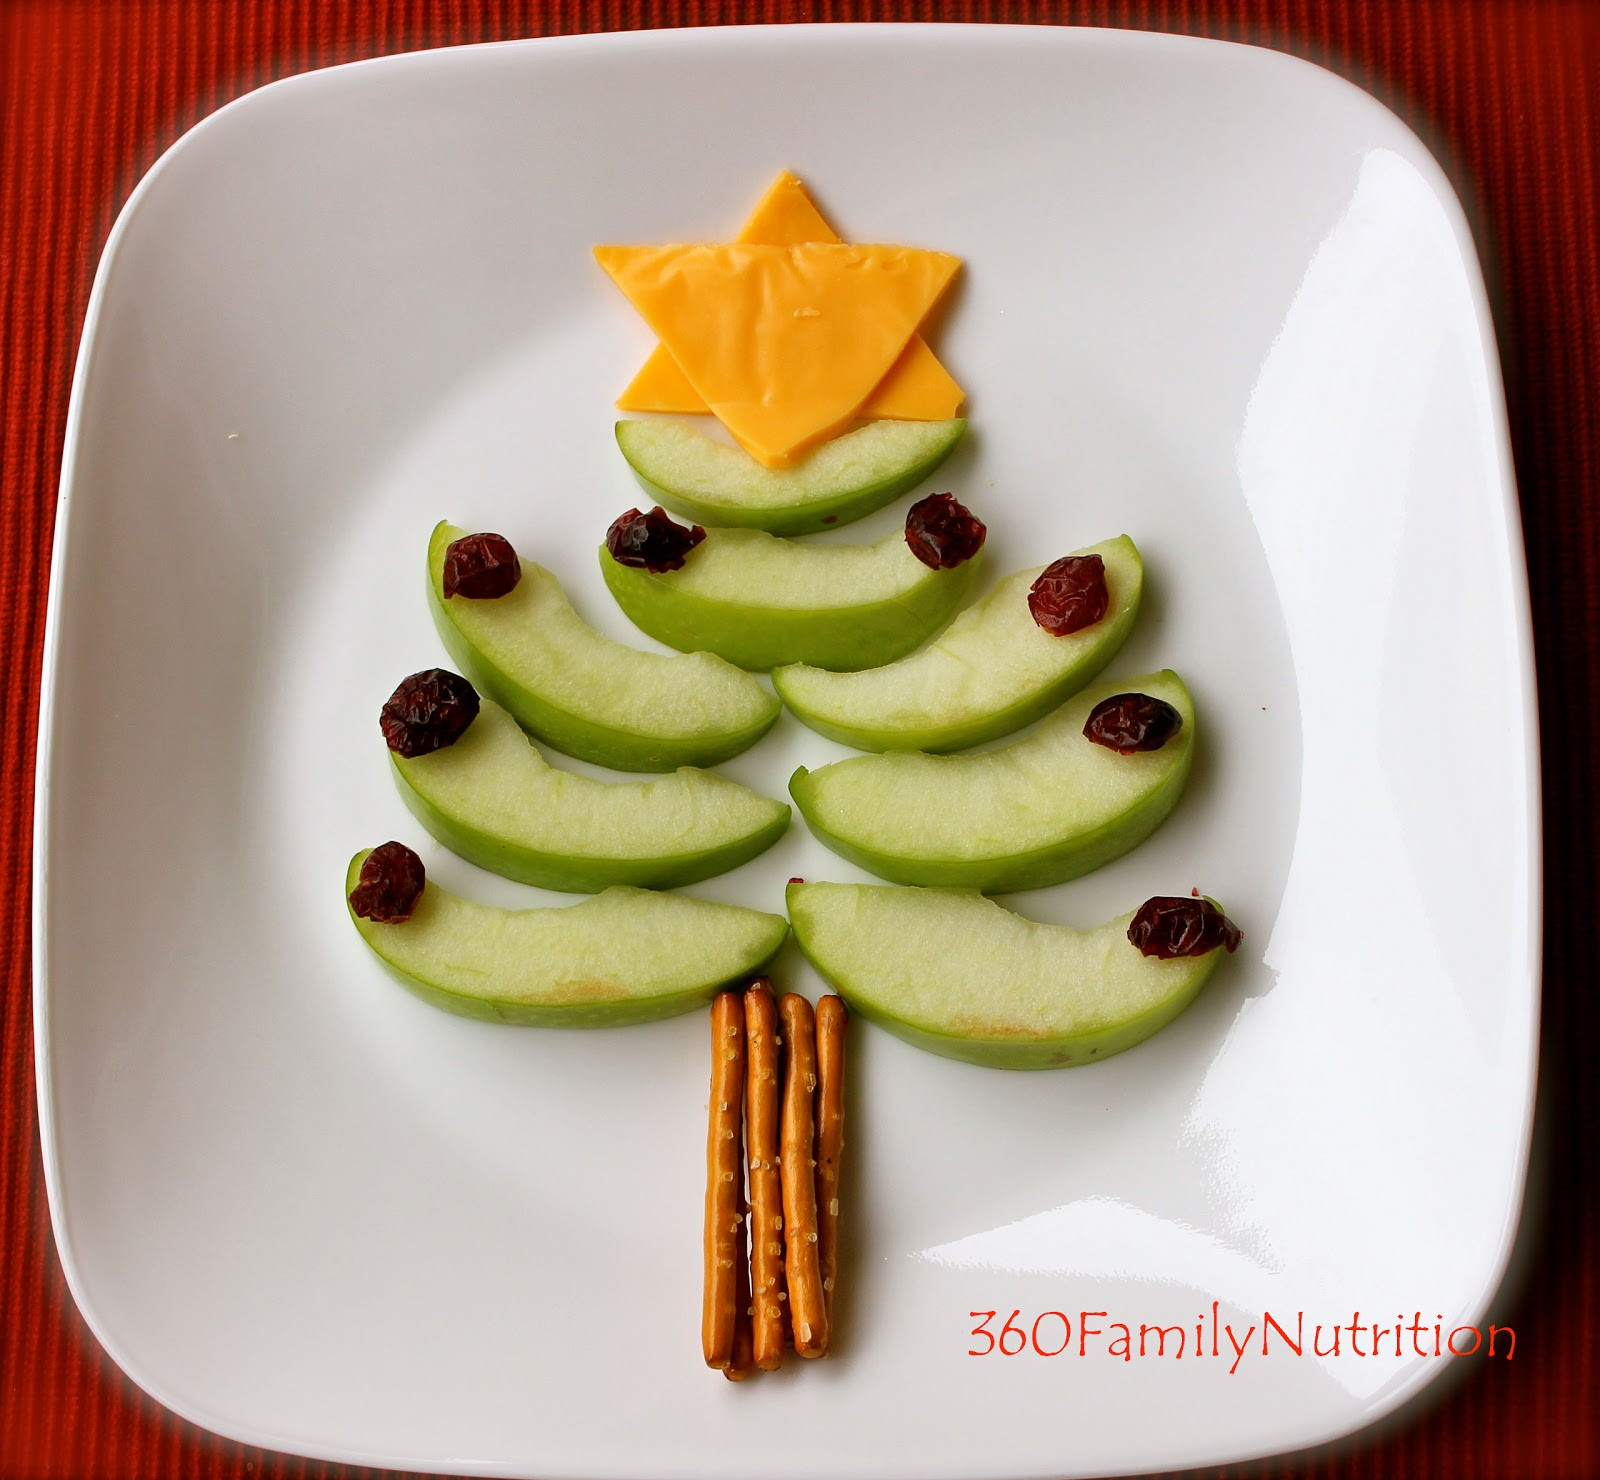 Healthy Christmas Snacks For Kids
 360FamilyNutrition Healthy Christmas Tree Snack